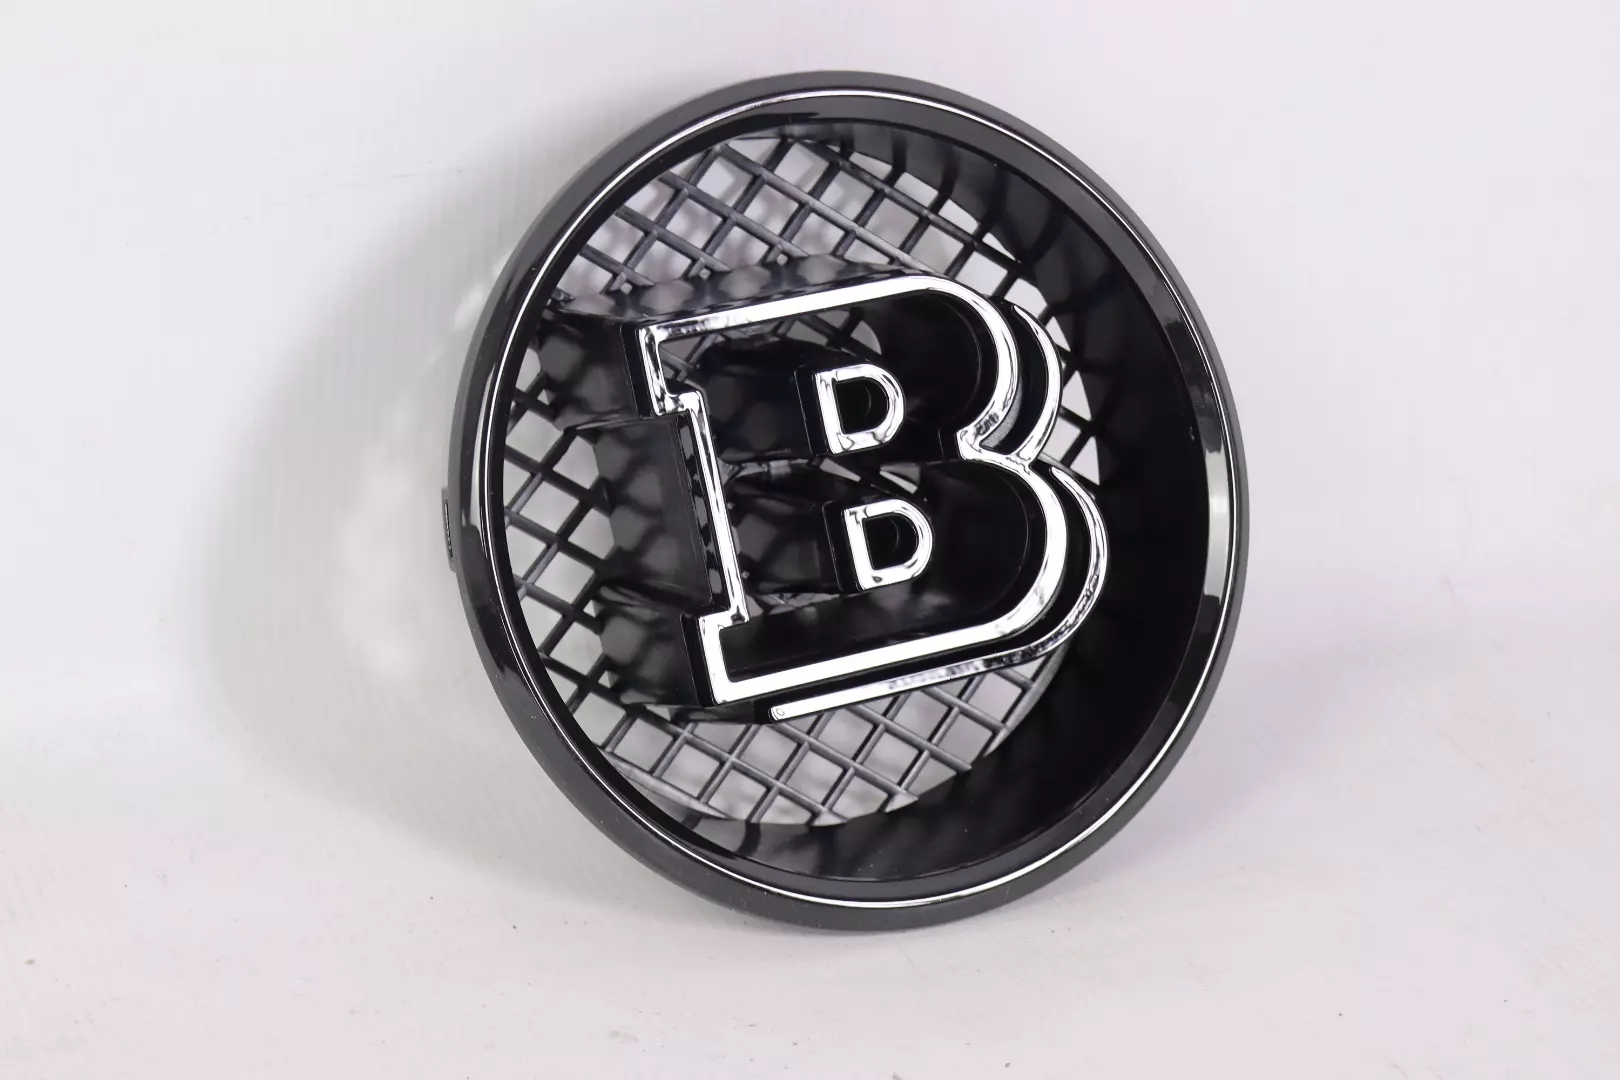 Grill Brabus Logo Emblem Grille Badge 18.5cm for Mercedes Benz G Class W463